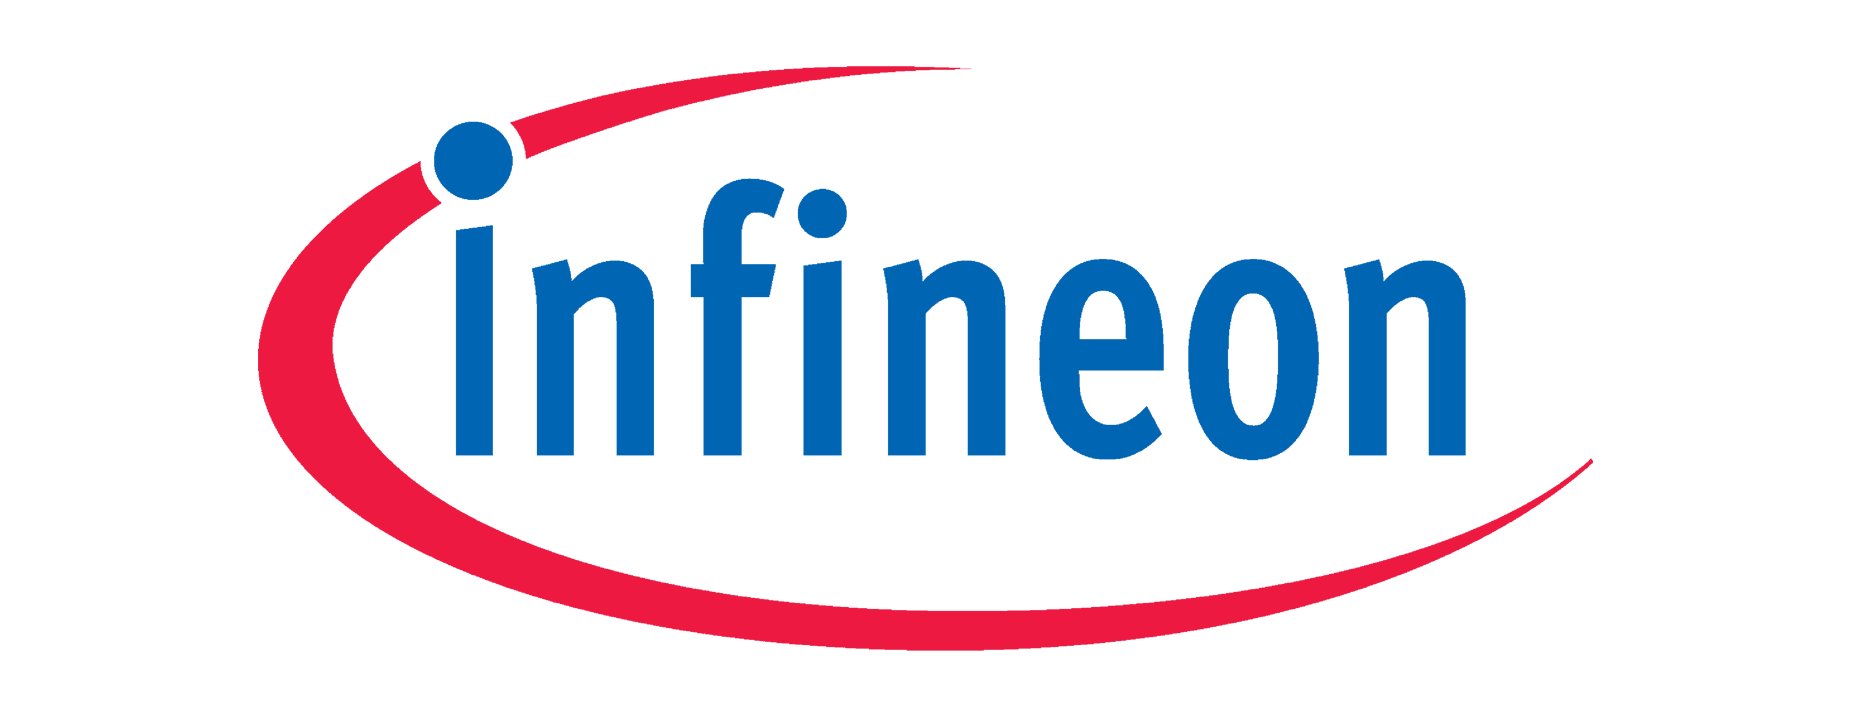 chipset-select-infineon.png